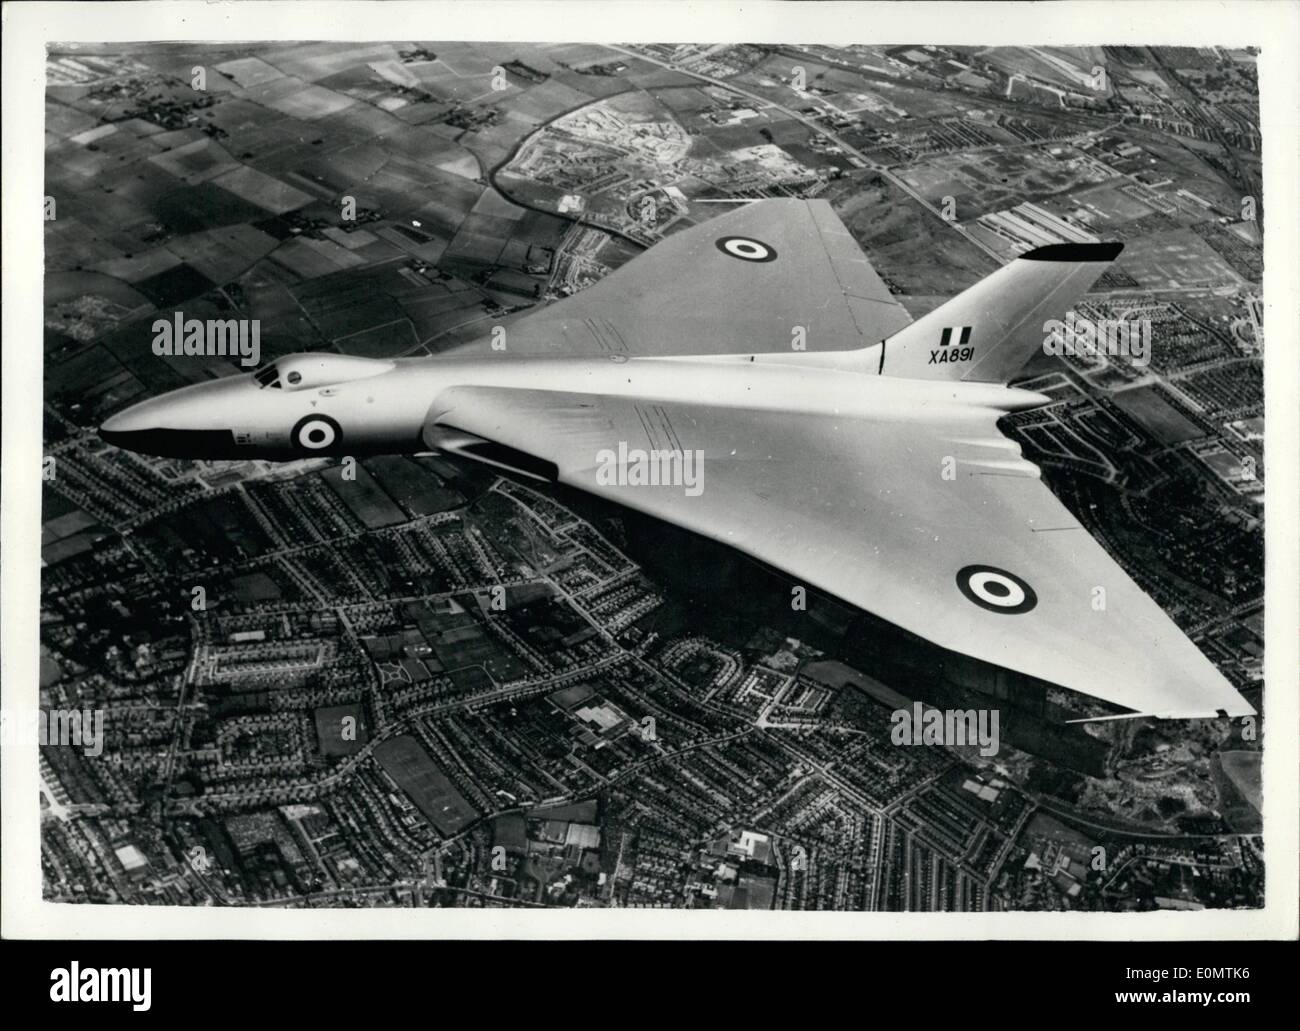 Sep. 05, 1956 - New picture of the delta wing Vulcan Bomber now to Service with the R.A.F.:         revolutionary  eloped military aircraft at the   Flying Display - is the Hawker delta wing Vulcan Bomber- which is now in service with the R.A.F. Poweral by four world altitude records  jet  the Vulcan was designed to most an   calling for 'he best conceivals attainment in speed altitude, range and loag carrying capacity Stock Photo